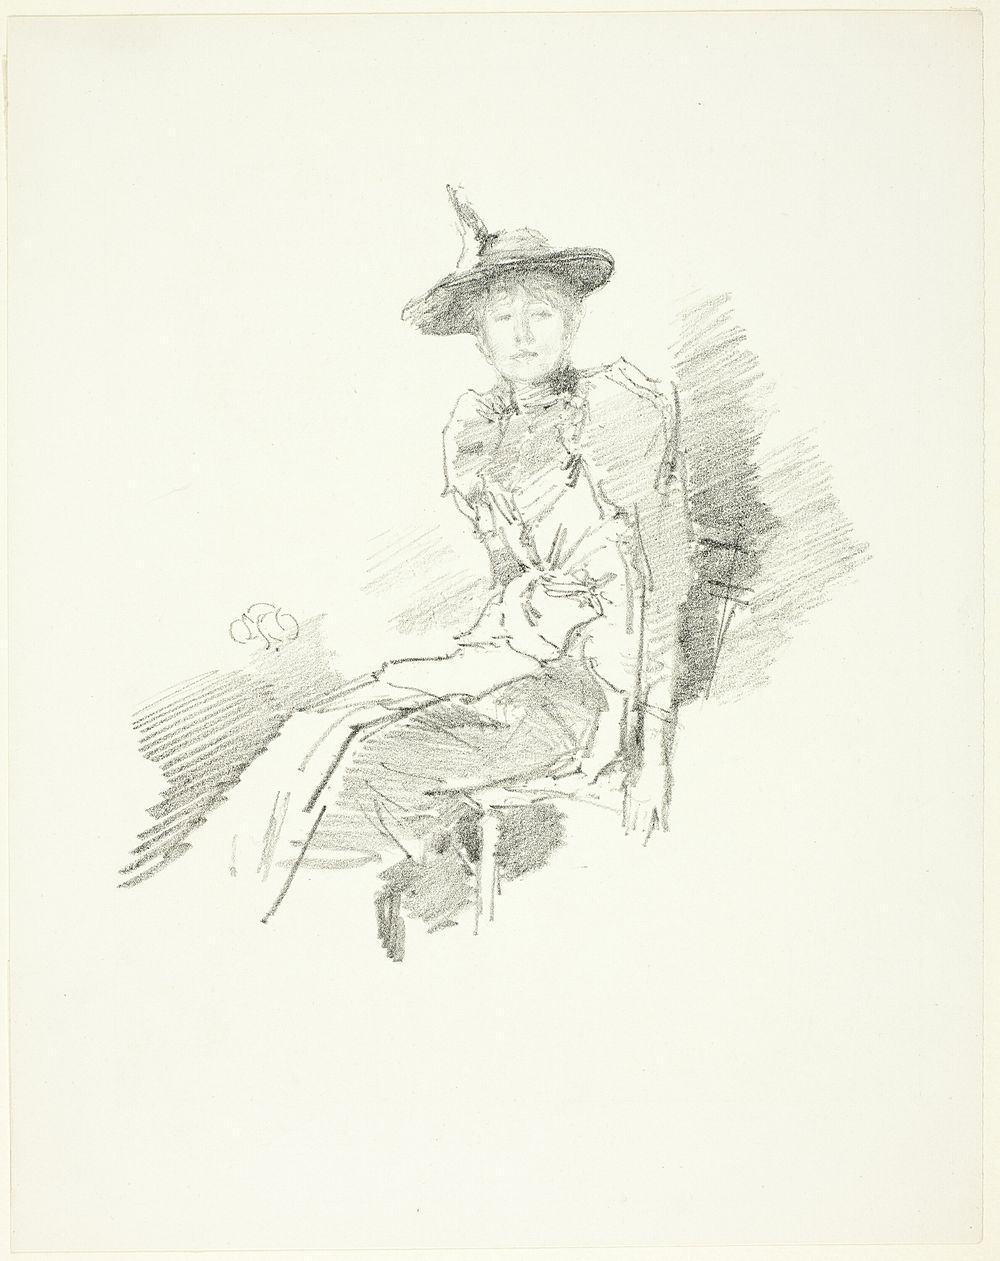 The Winged Hat by James McNeill Whistler